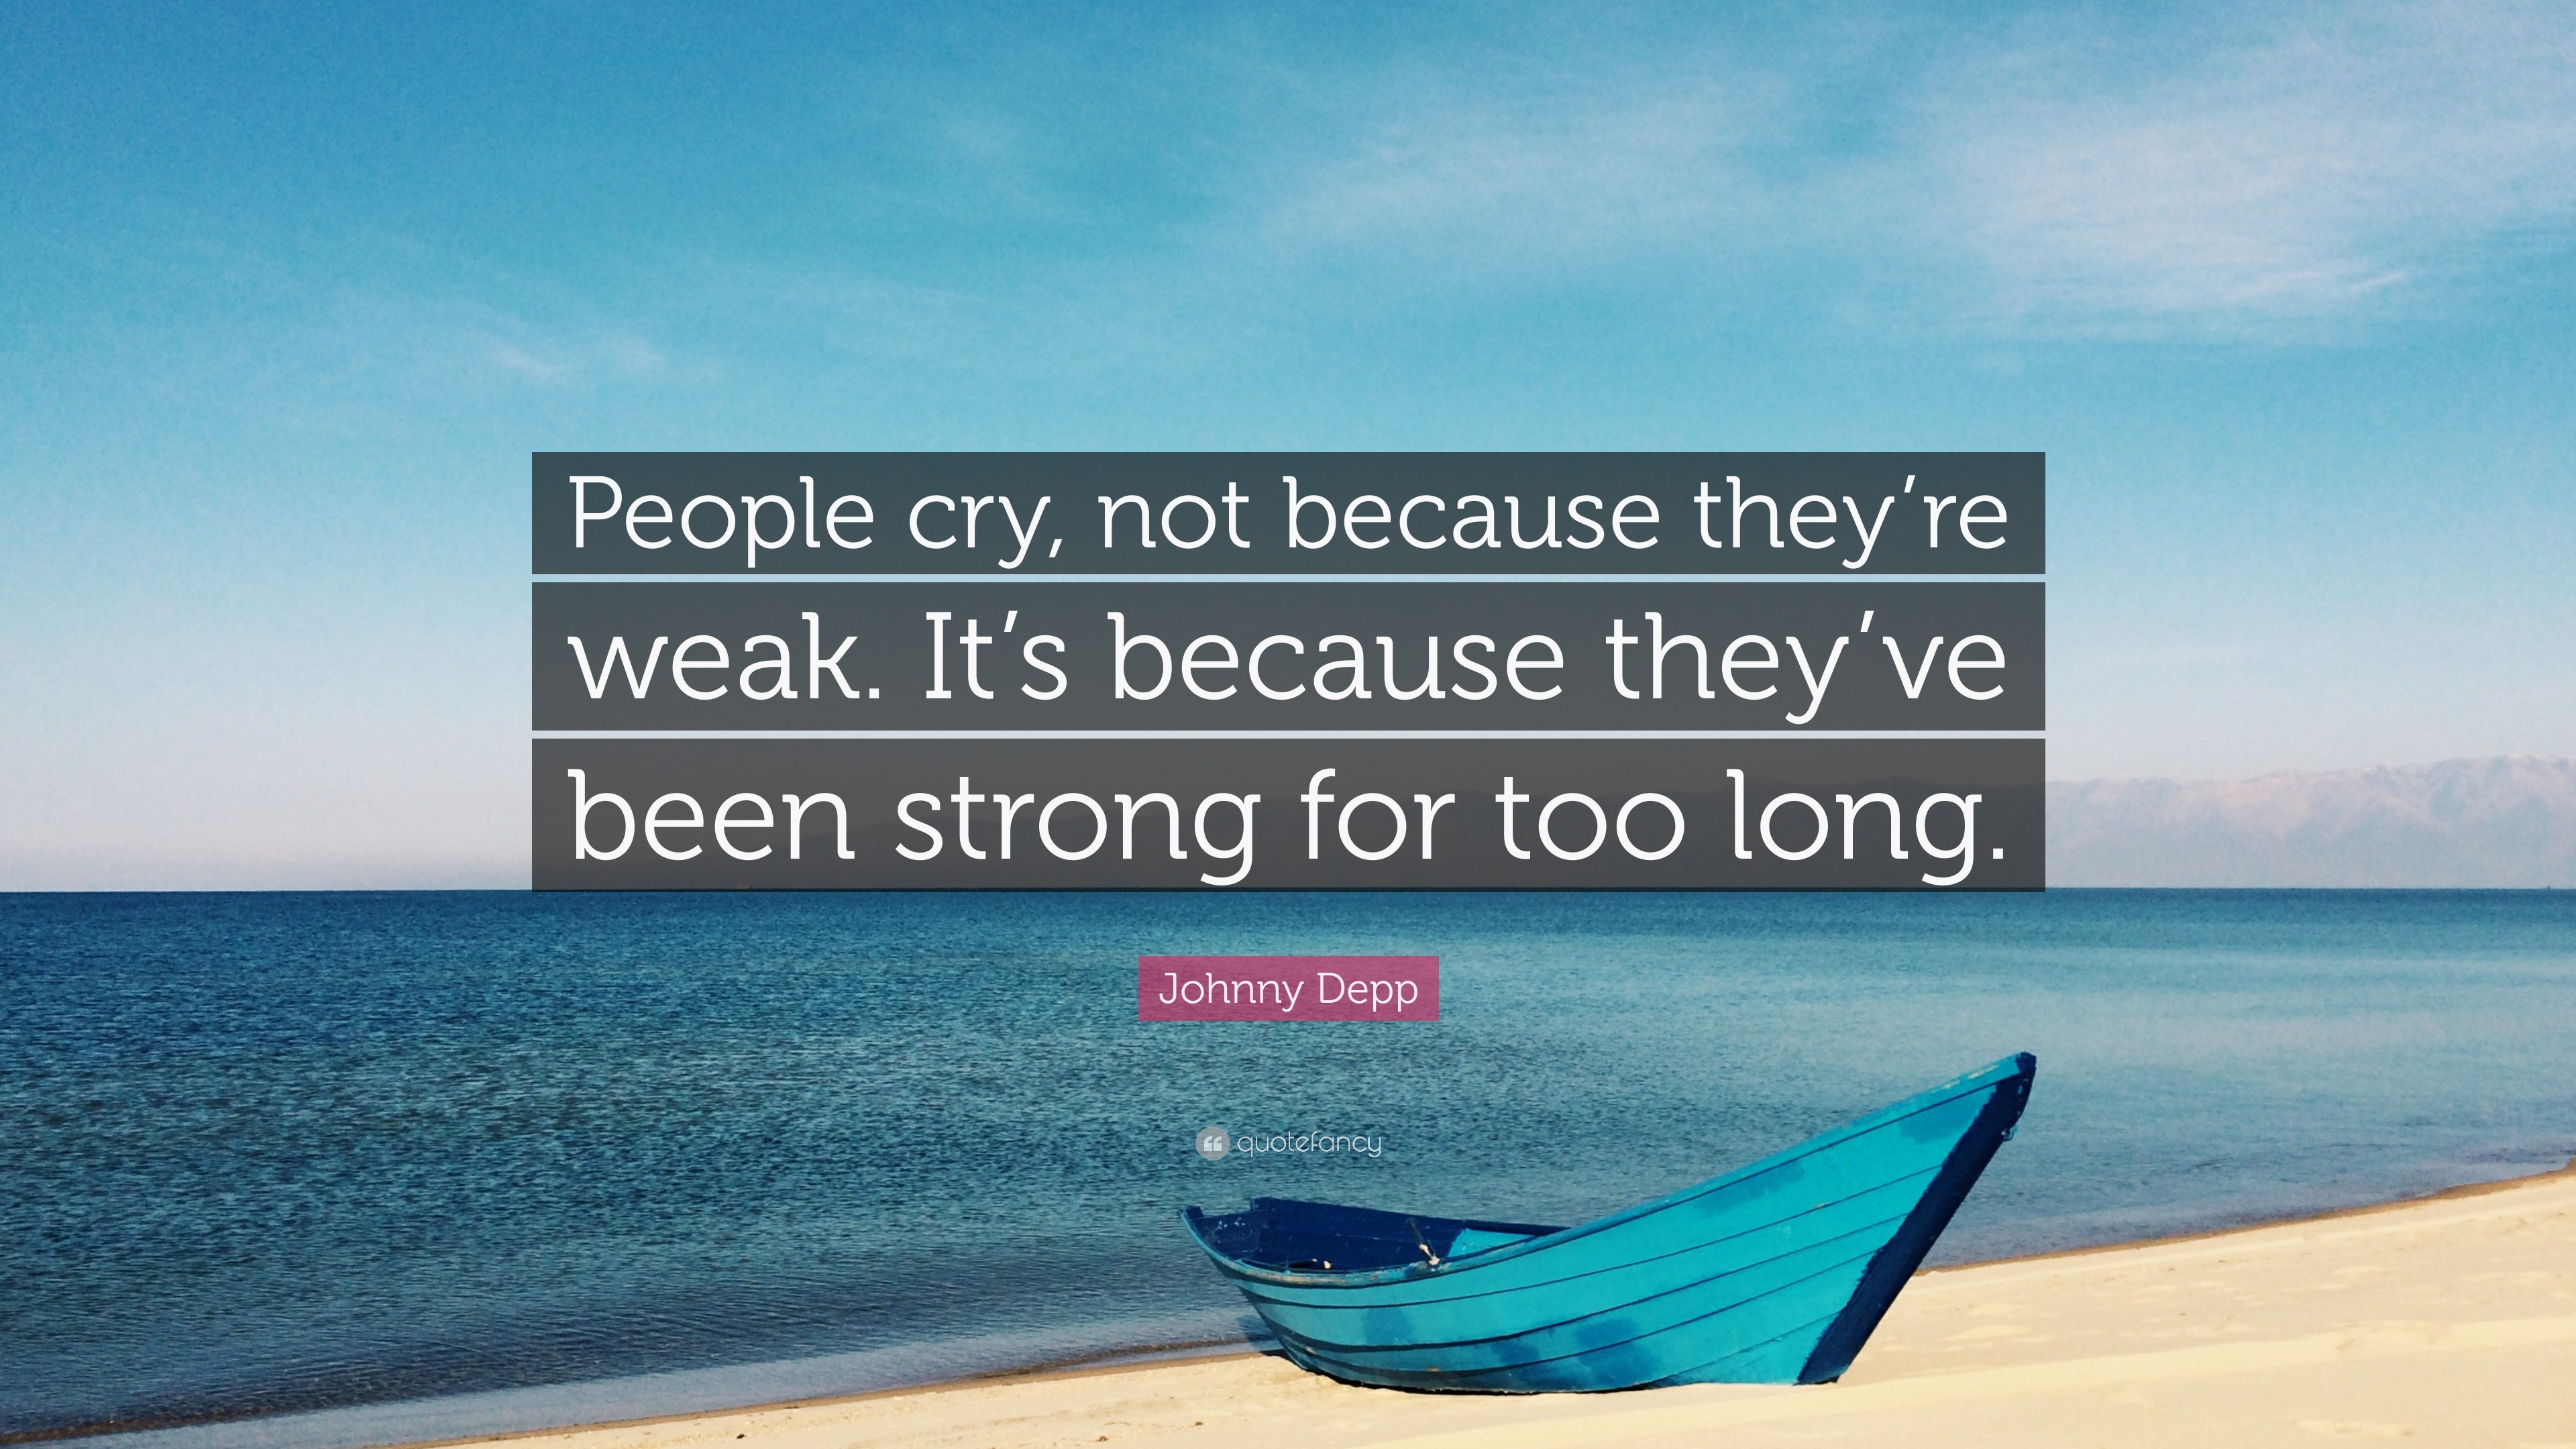 Johnny Depp Quote “people Cry Not Because They Re Weak It S Because They Ve Been Strong For